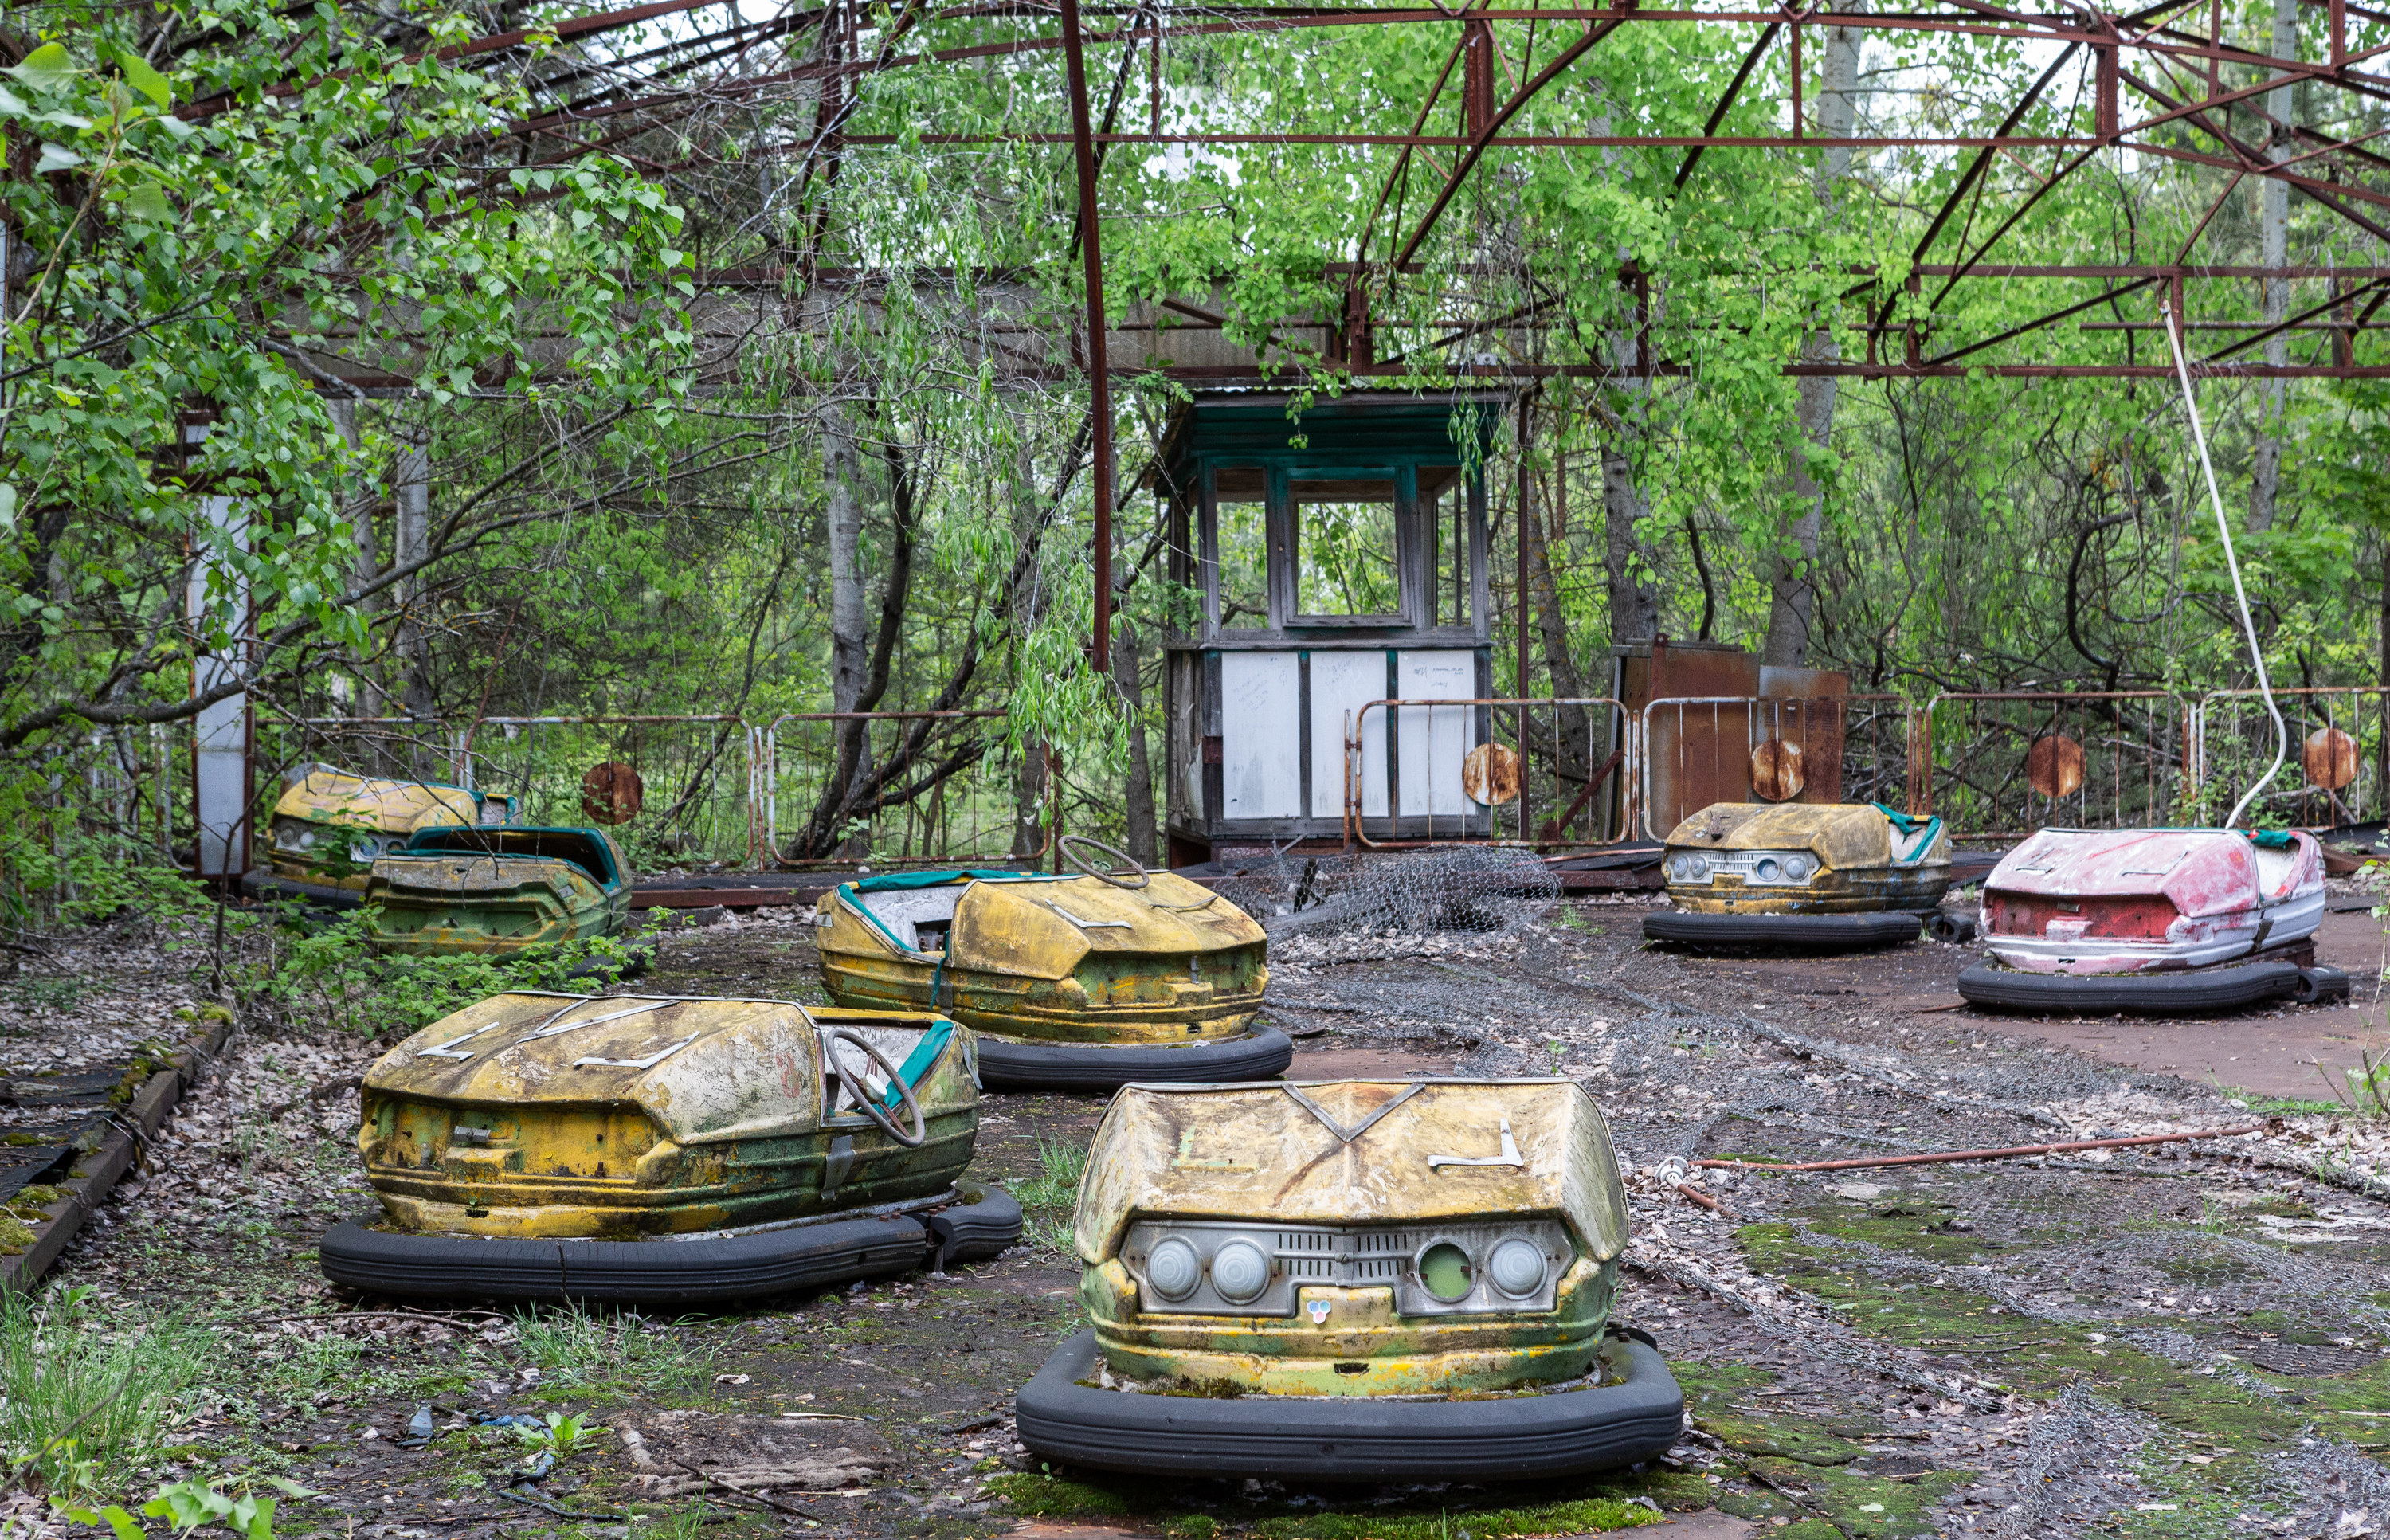 abandoned bumper cars in a forest